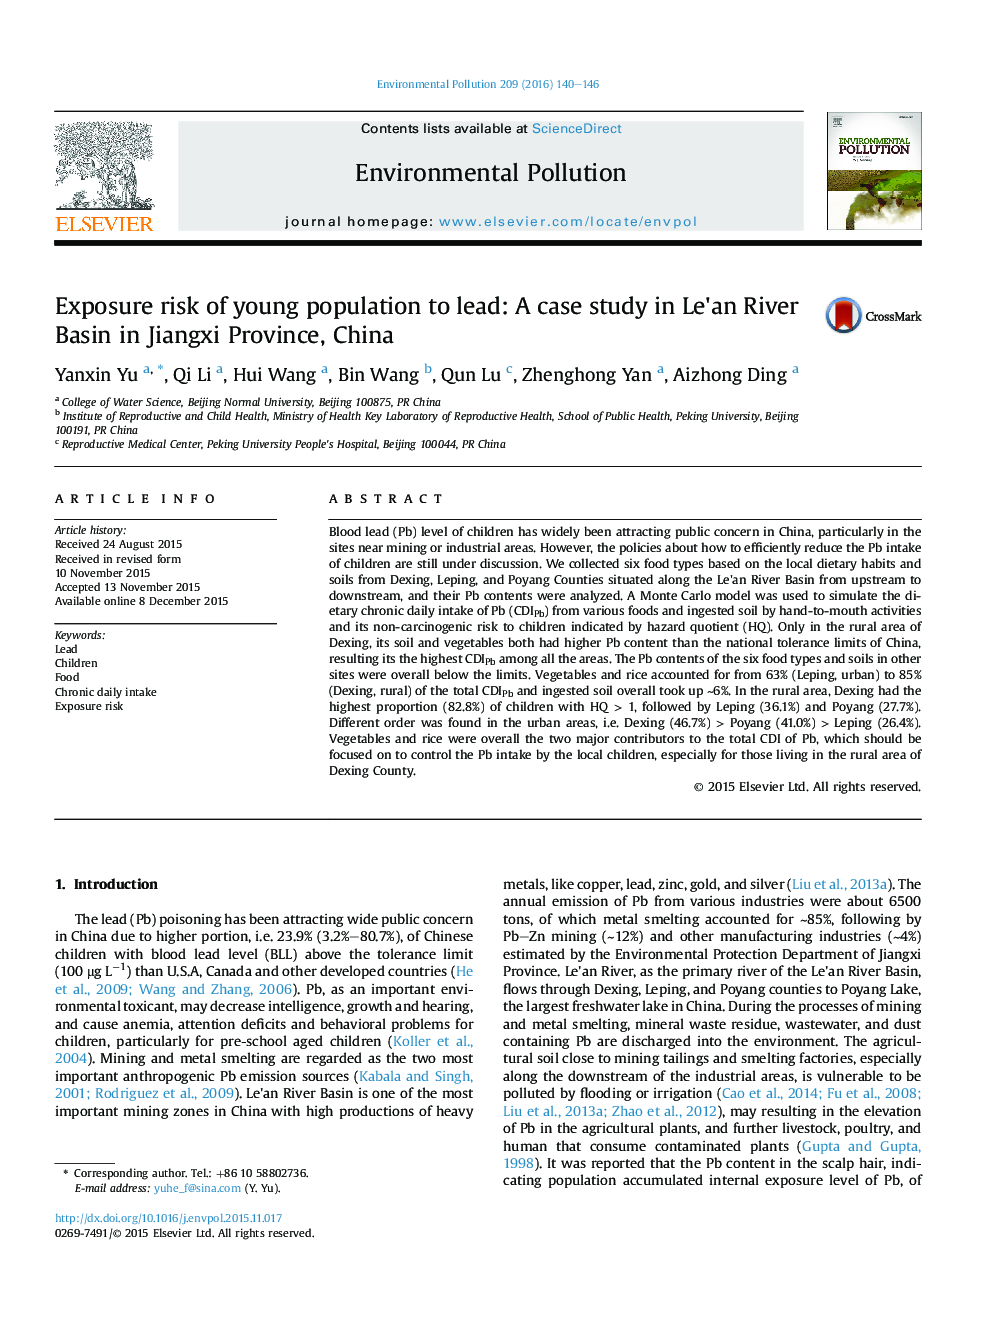 Exposure risk of young population to lead: A case study in Le'an River Basin in Jiangxi Province, China